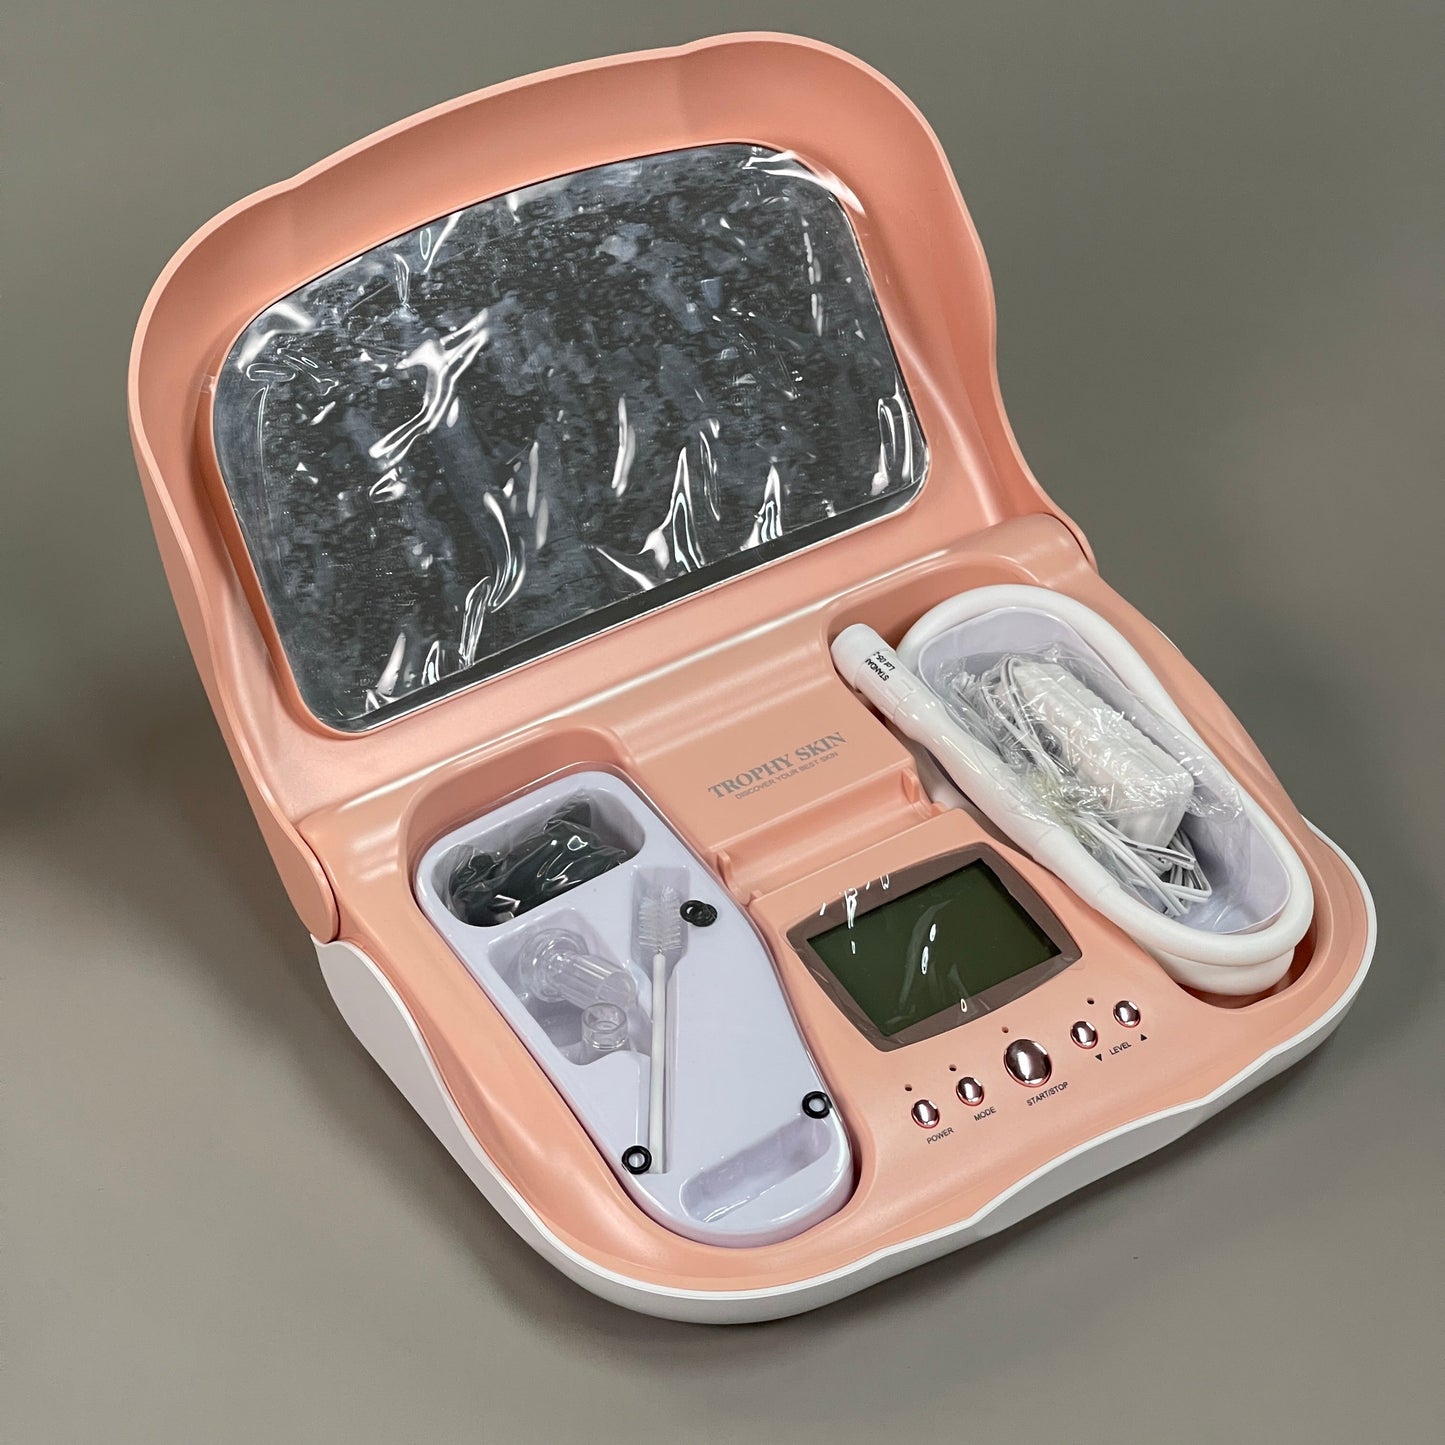 ZA@ TROPHY SKIN Microderm MD Microdermabrasion System Home TSMMD02-B Blush (AS-IS, Open Box)